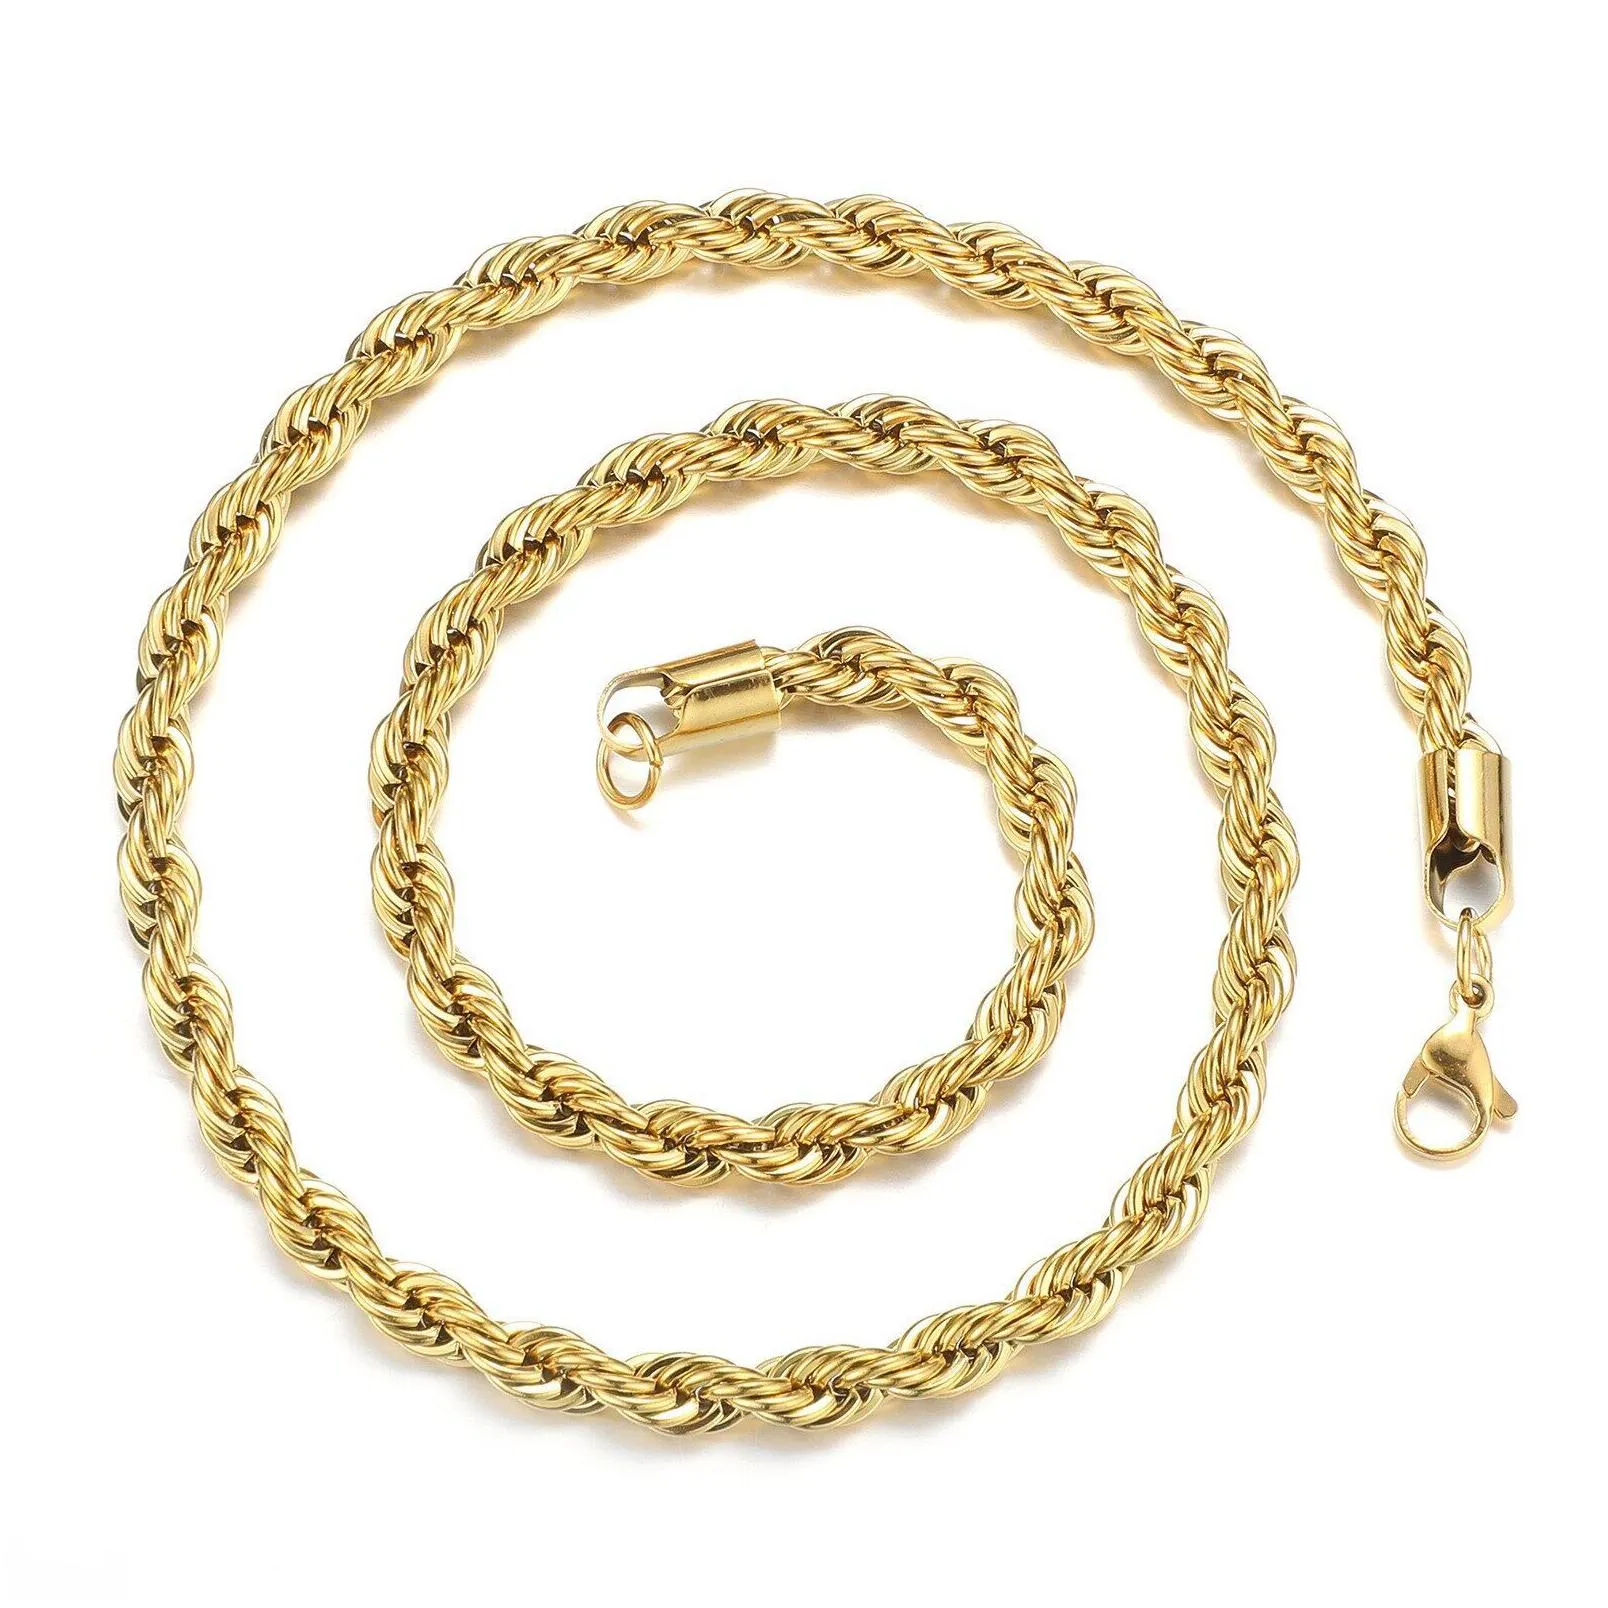 Chains 2-6Mm Twisted Singapore Gold Chain Necklace Stainless Steel Never Fade Waterproof Choker Men Women Fashion Jewelry Jewelry Neck Dhwec